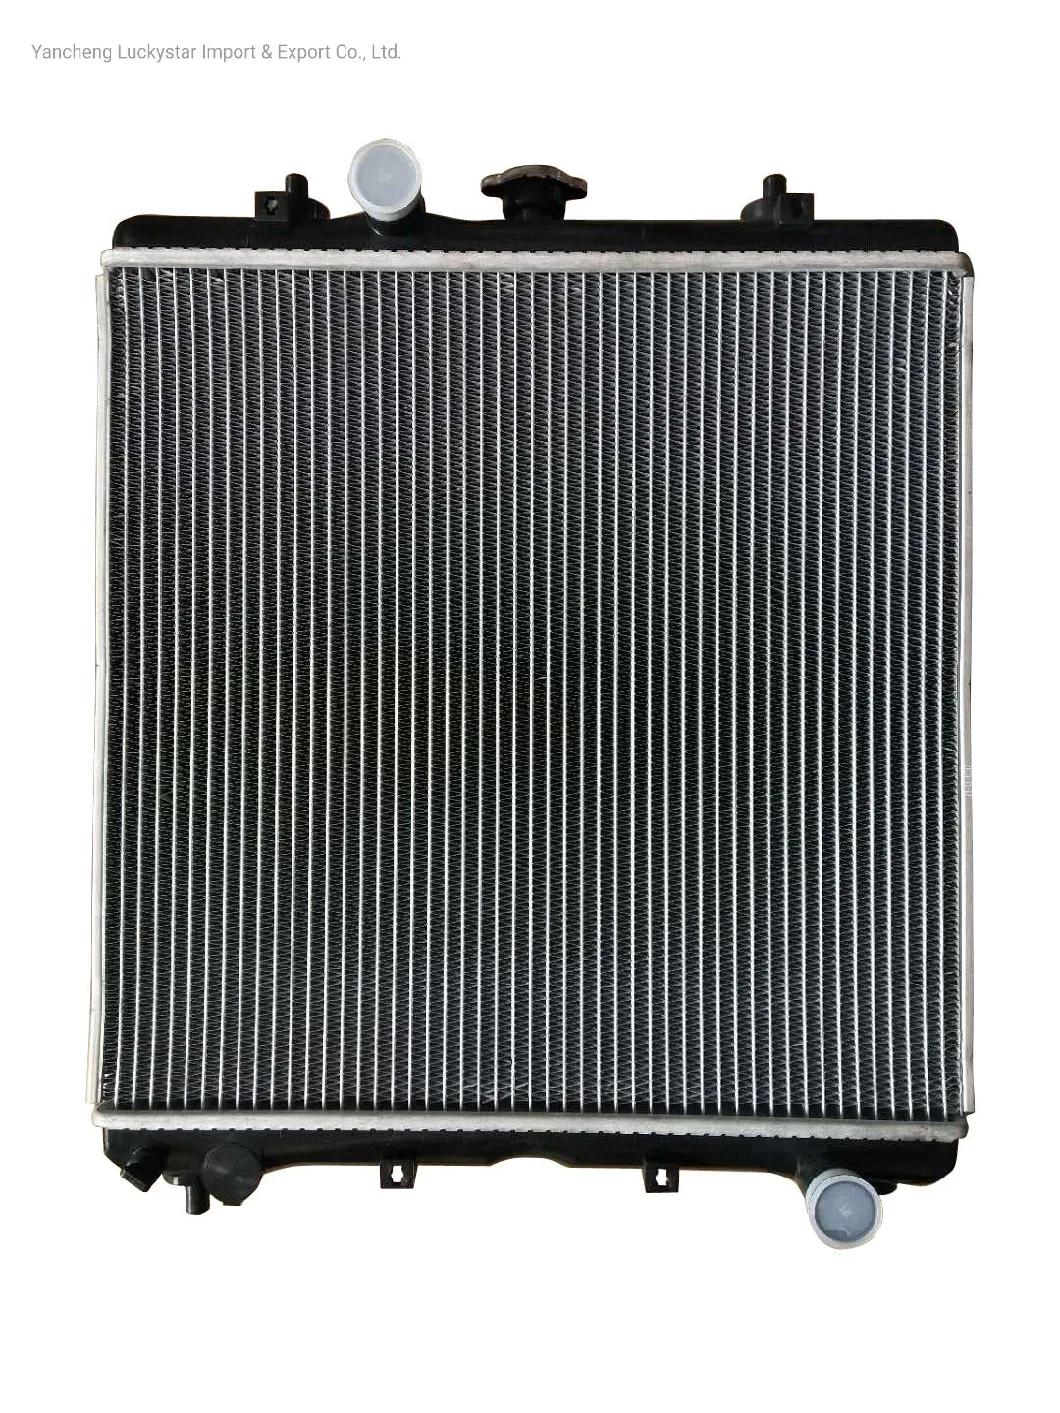 The Best Assy Radiator 3c081-17100 Kubota Tractor Spare Parts Used for M9540